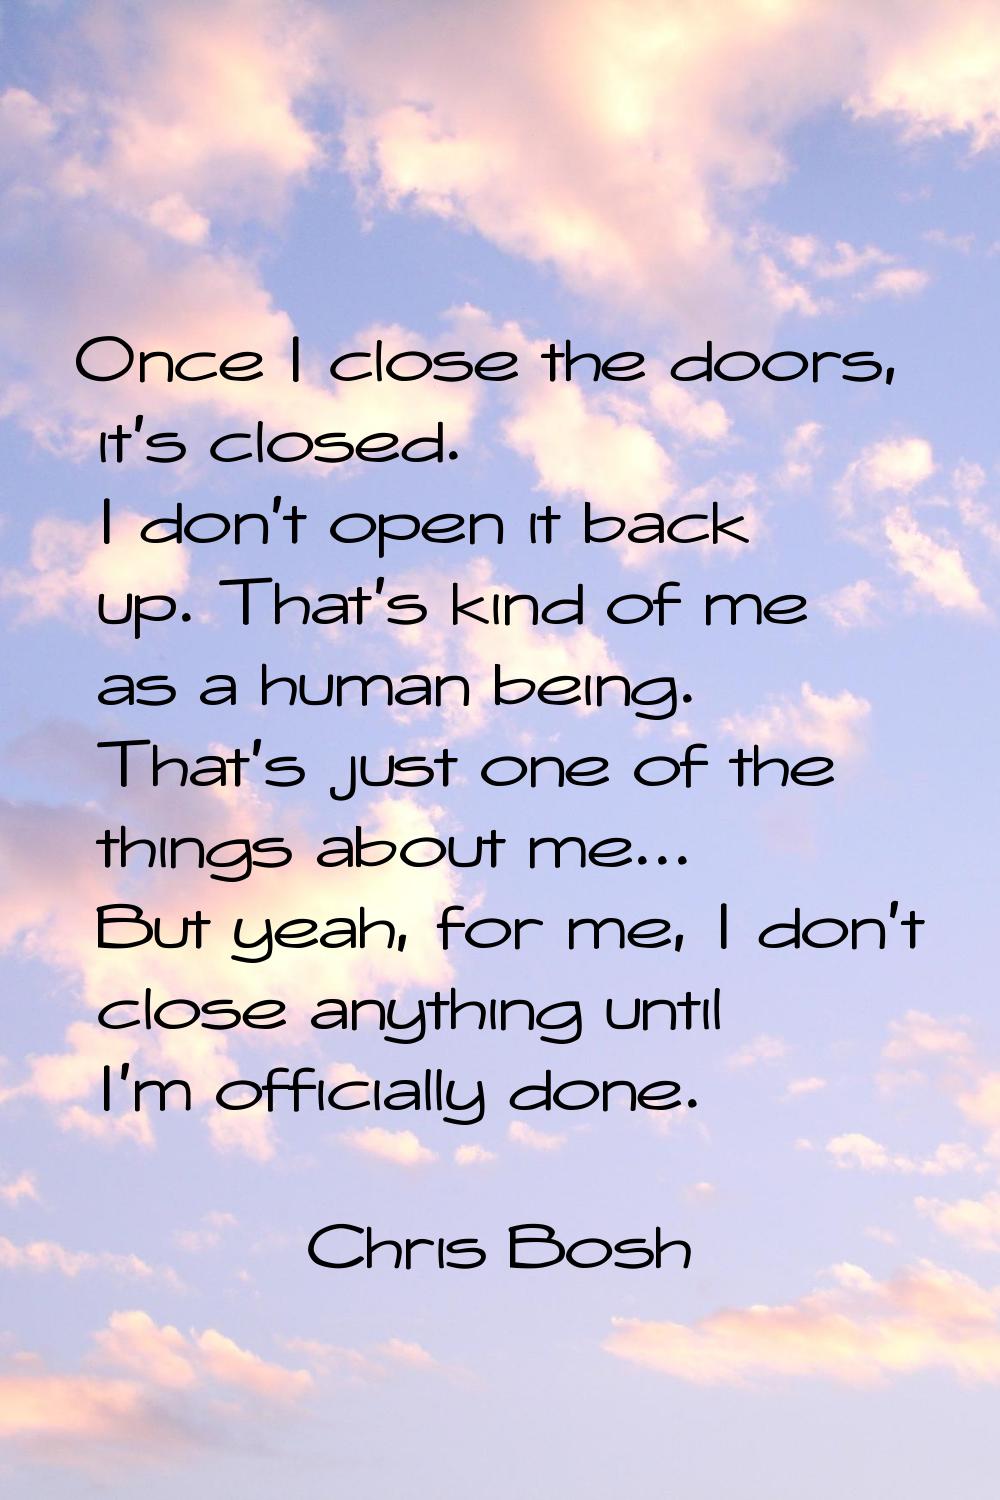 Once I close the doors, it's closed. I don't open it back up. That's kind of me as a human being. T